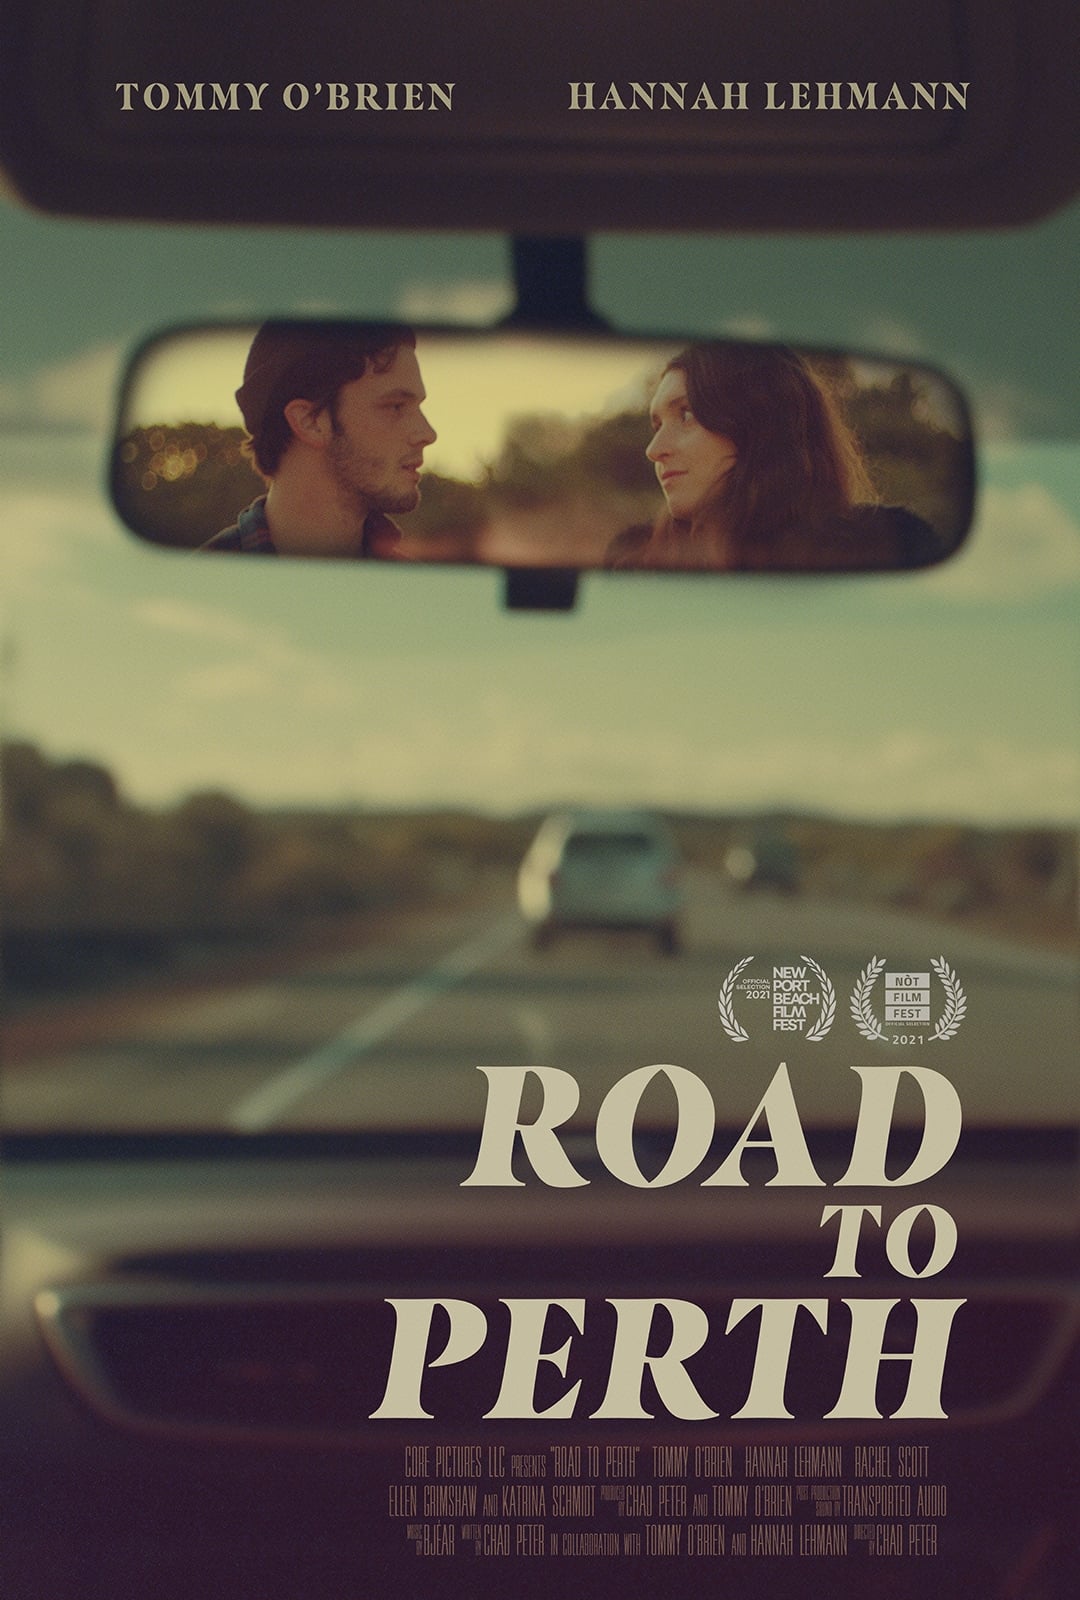 Road to Perth (Road to Perth) [2021]